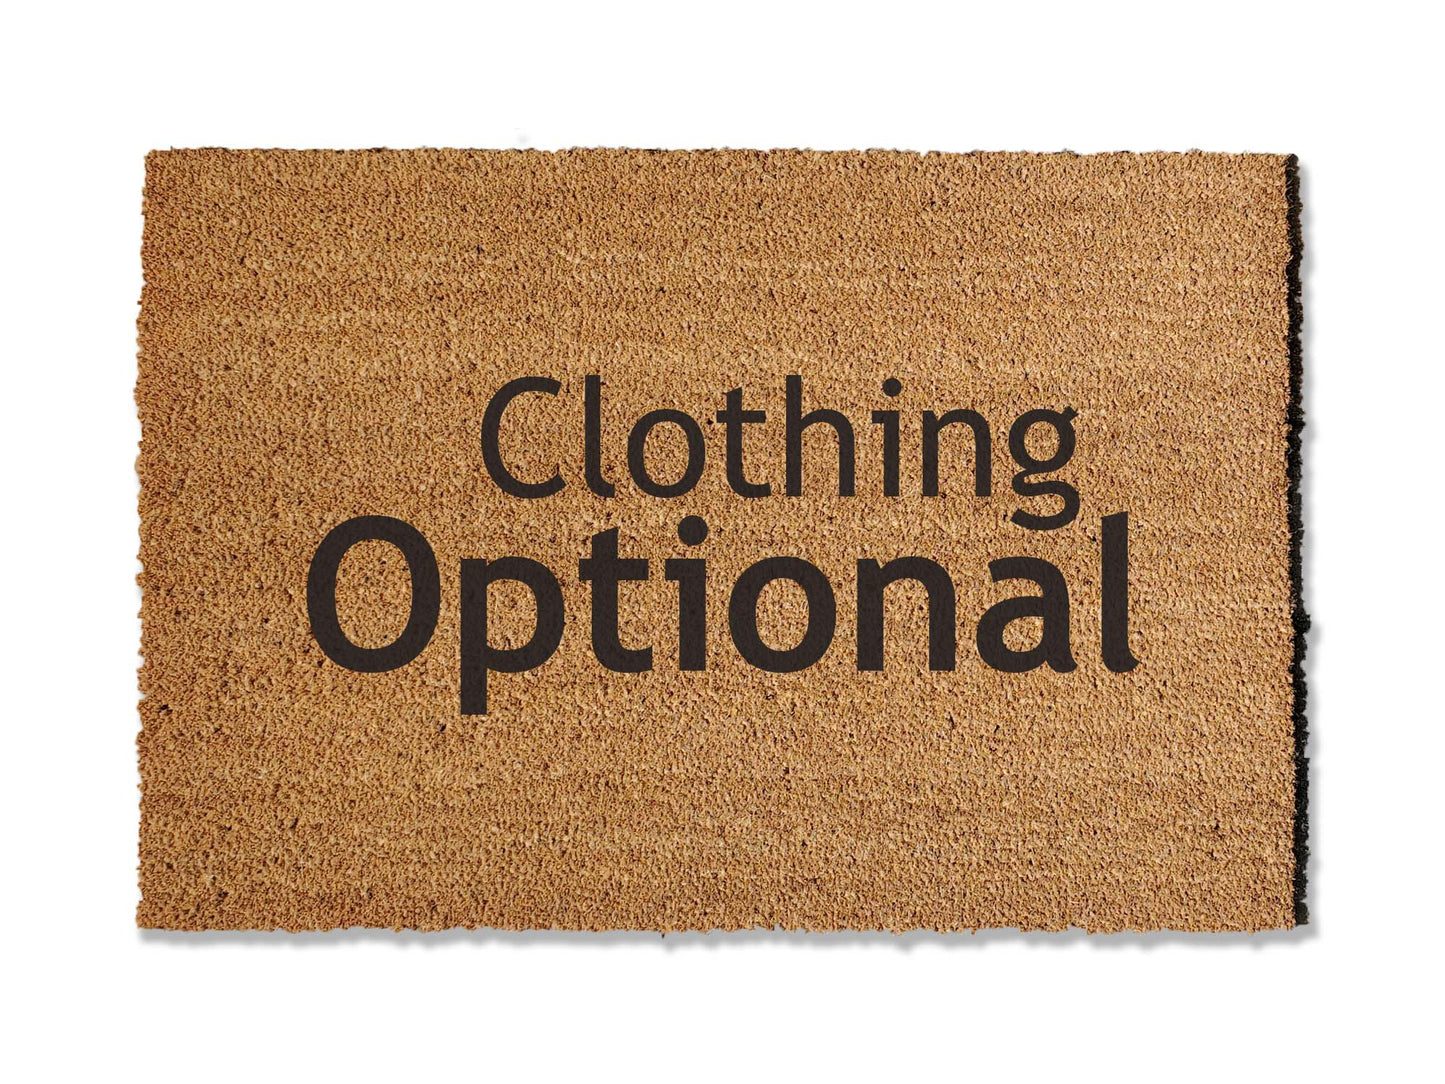 Add a touch of humor to your entryway with our 'Clothing Optional' coir welcome doormat, available in multiple sizes. Spruce up your doorstep and greet guests with a smile!